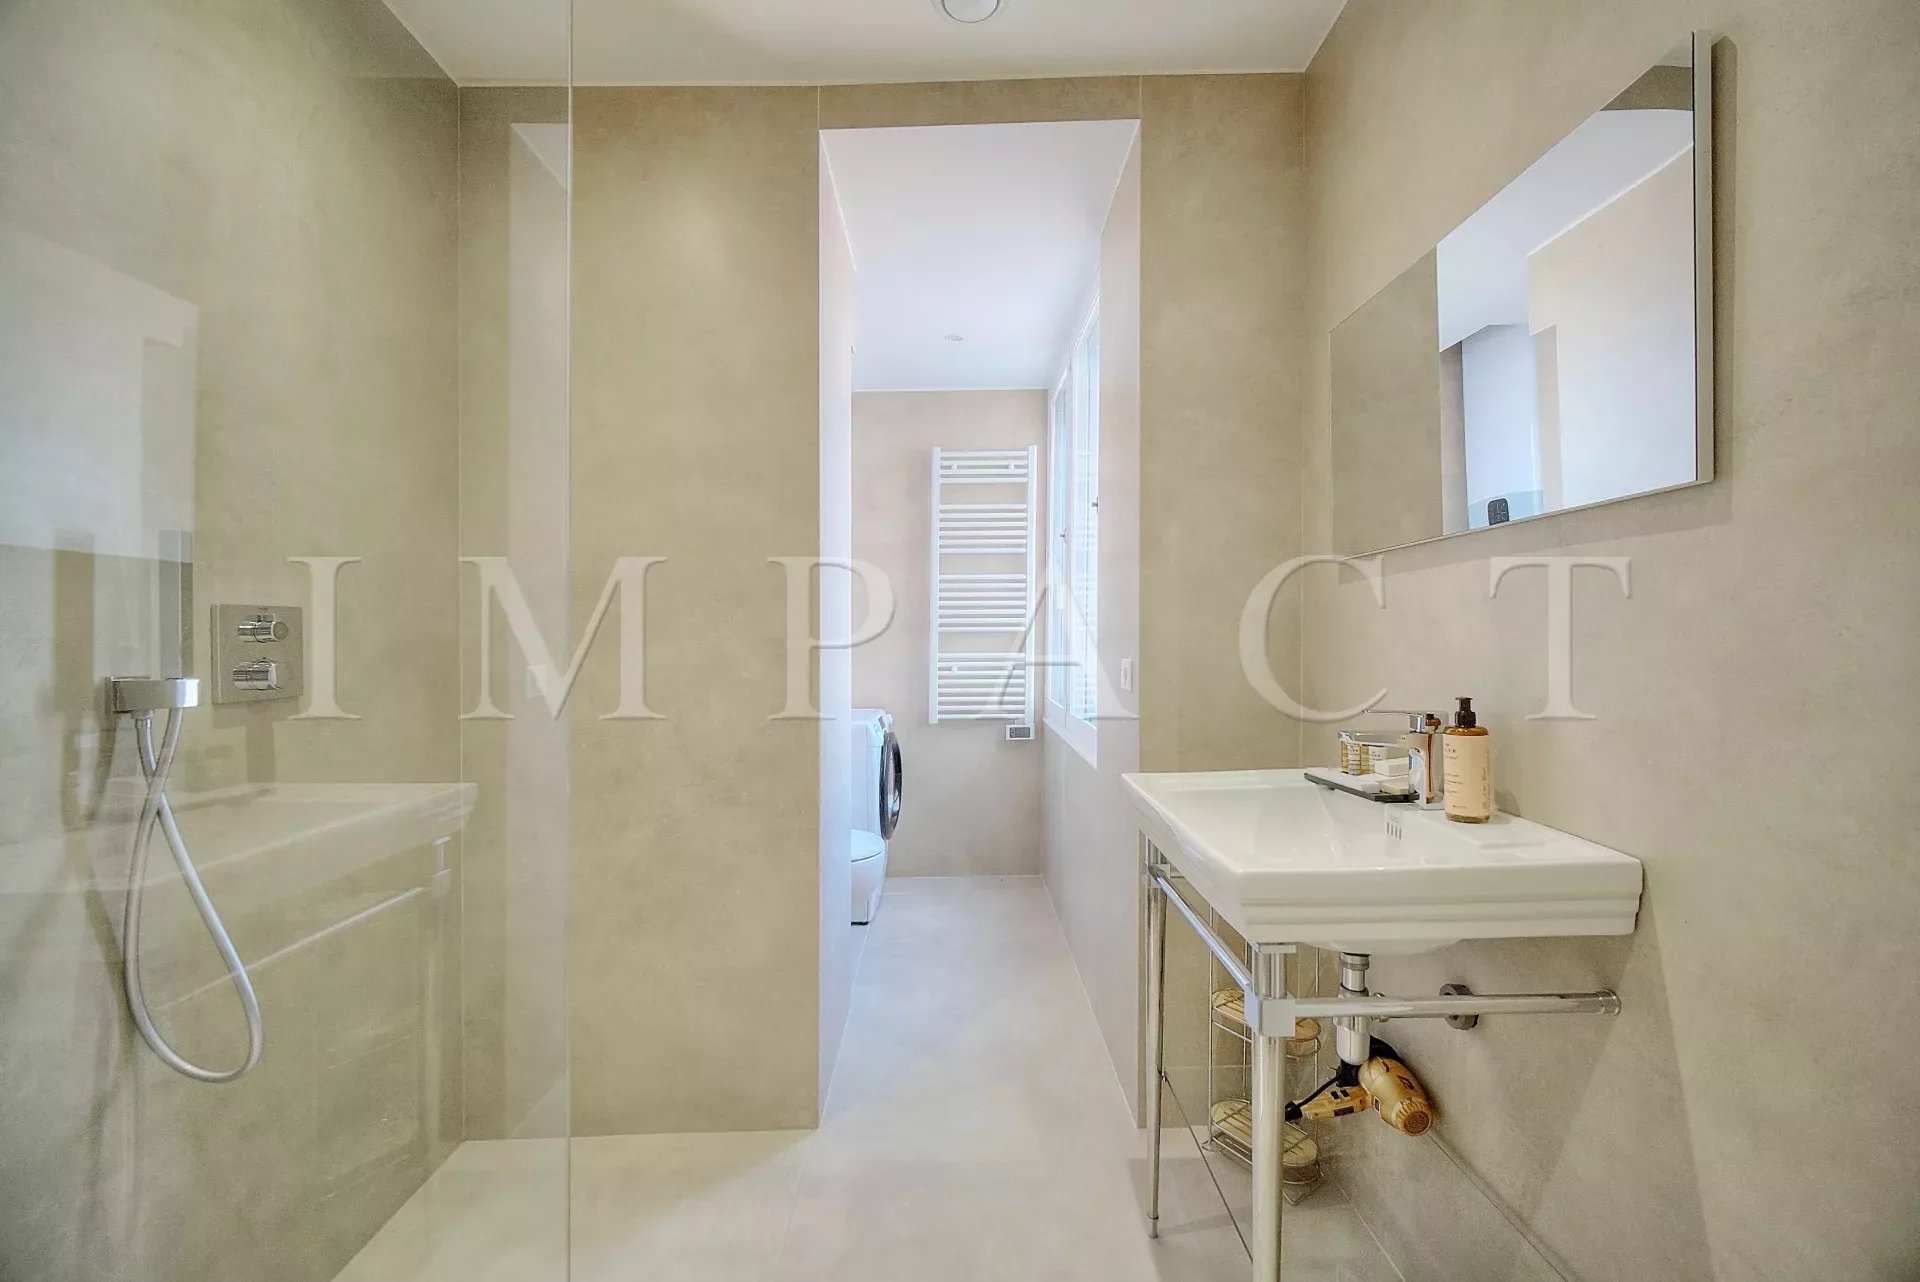 Beautiful apartment in the center of cannes for rent